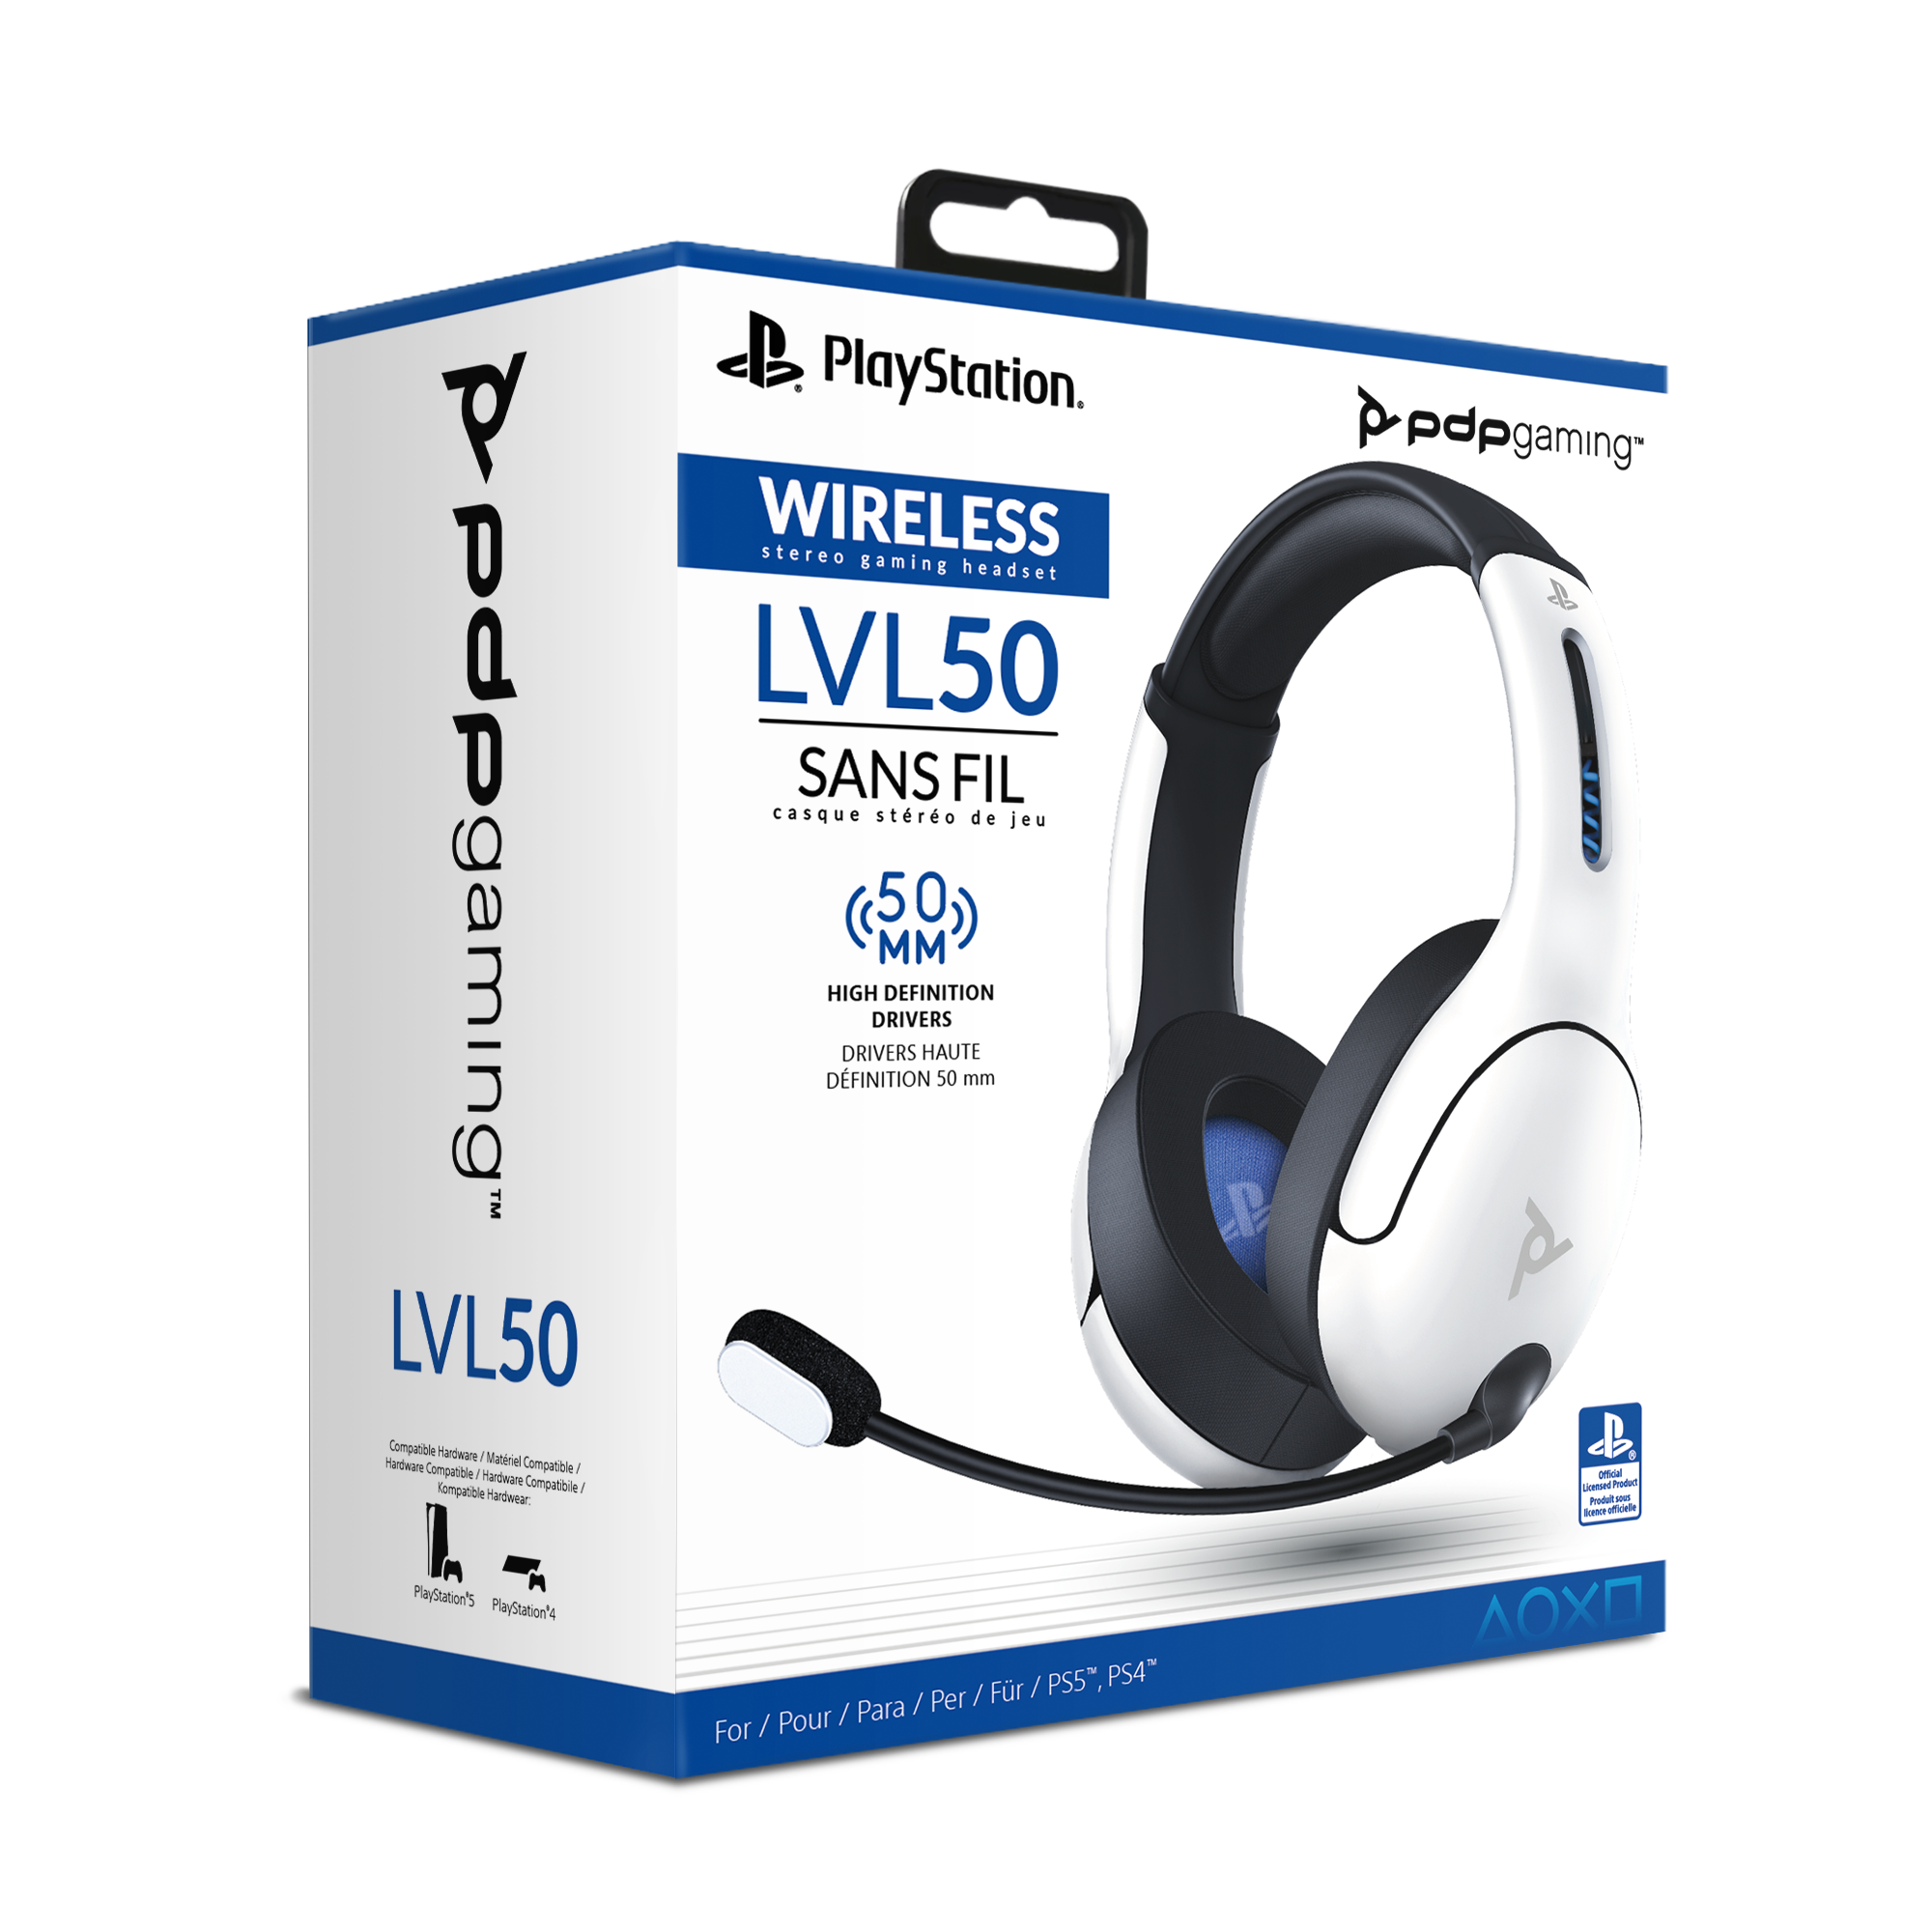 PDP Gaming LVL50 Wireless Stereo Headset for PS4 White, PlayStation 4